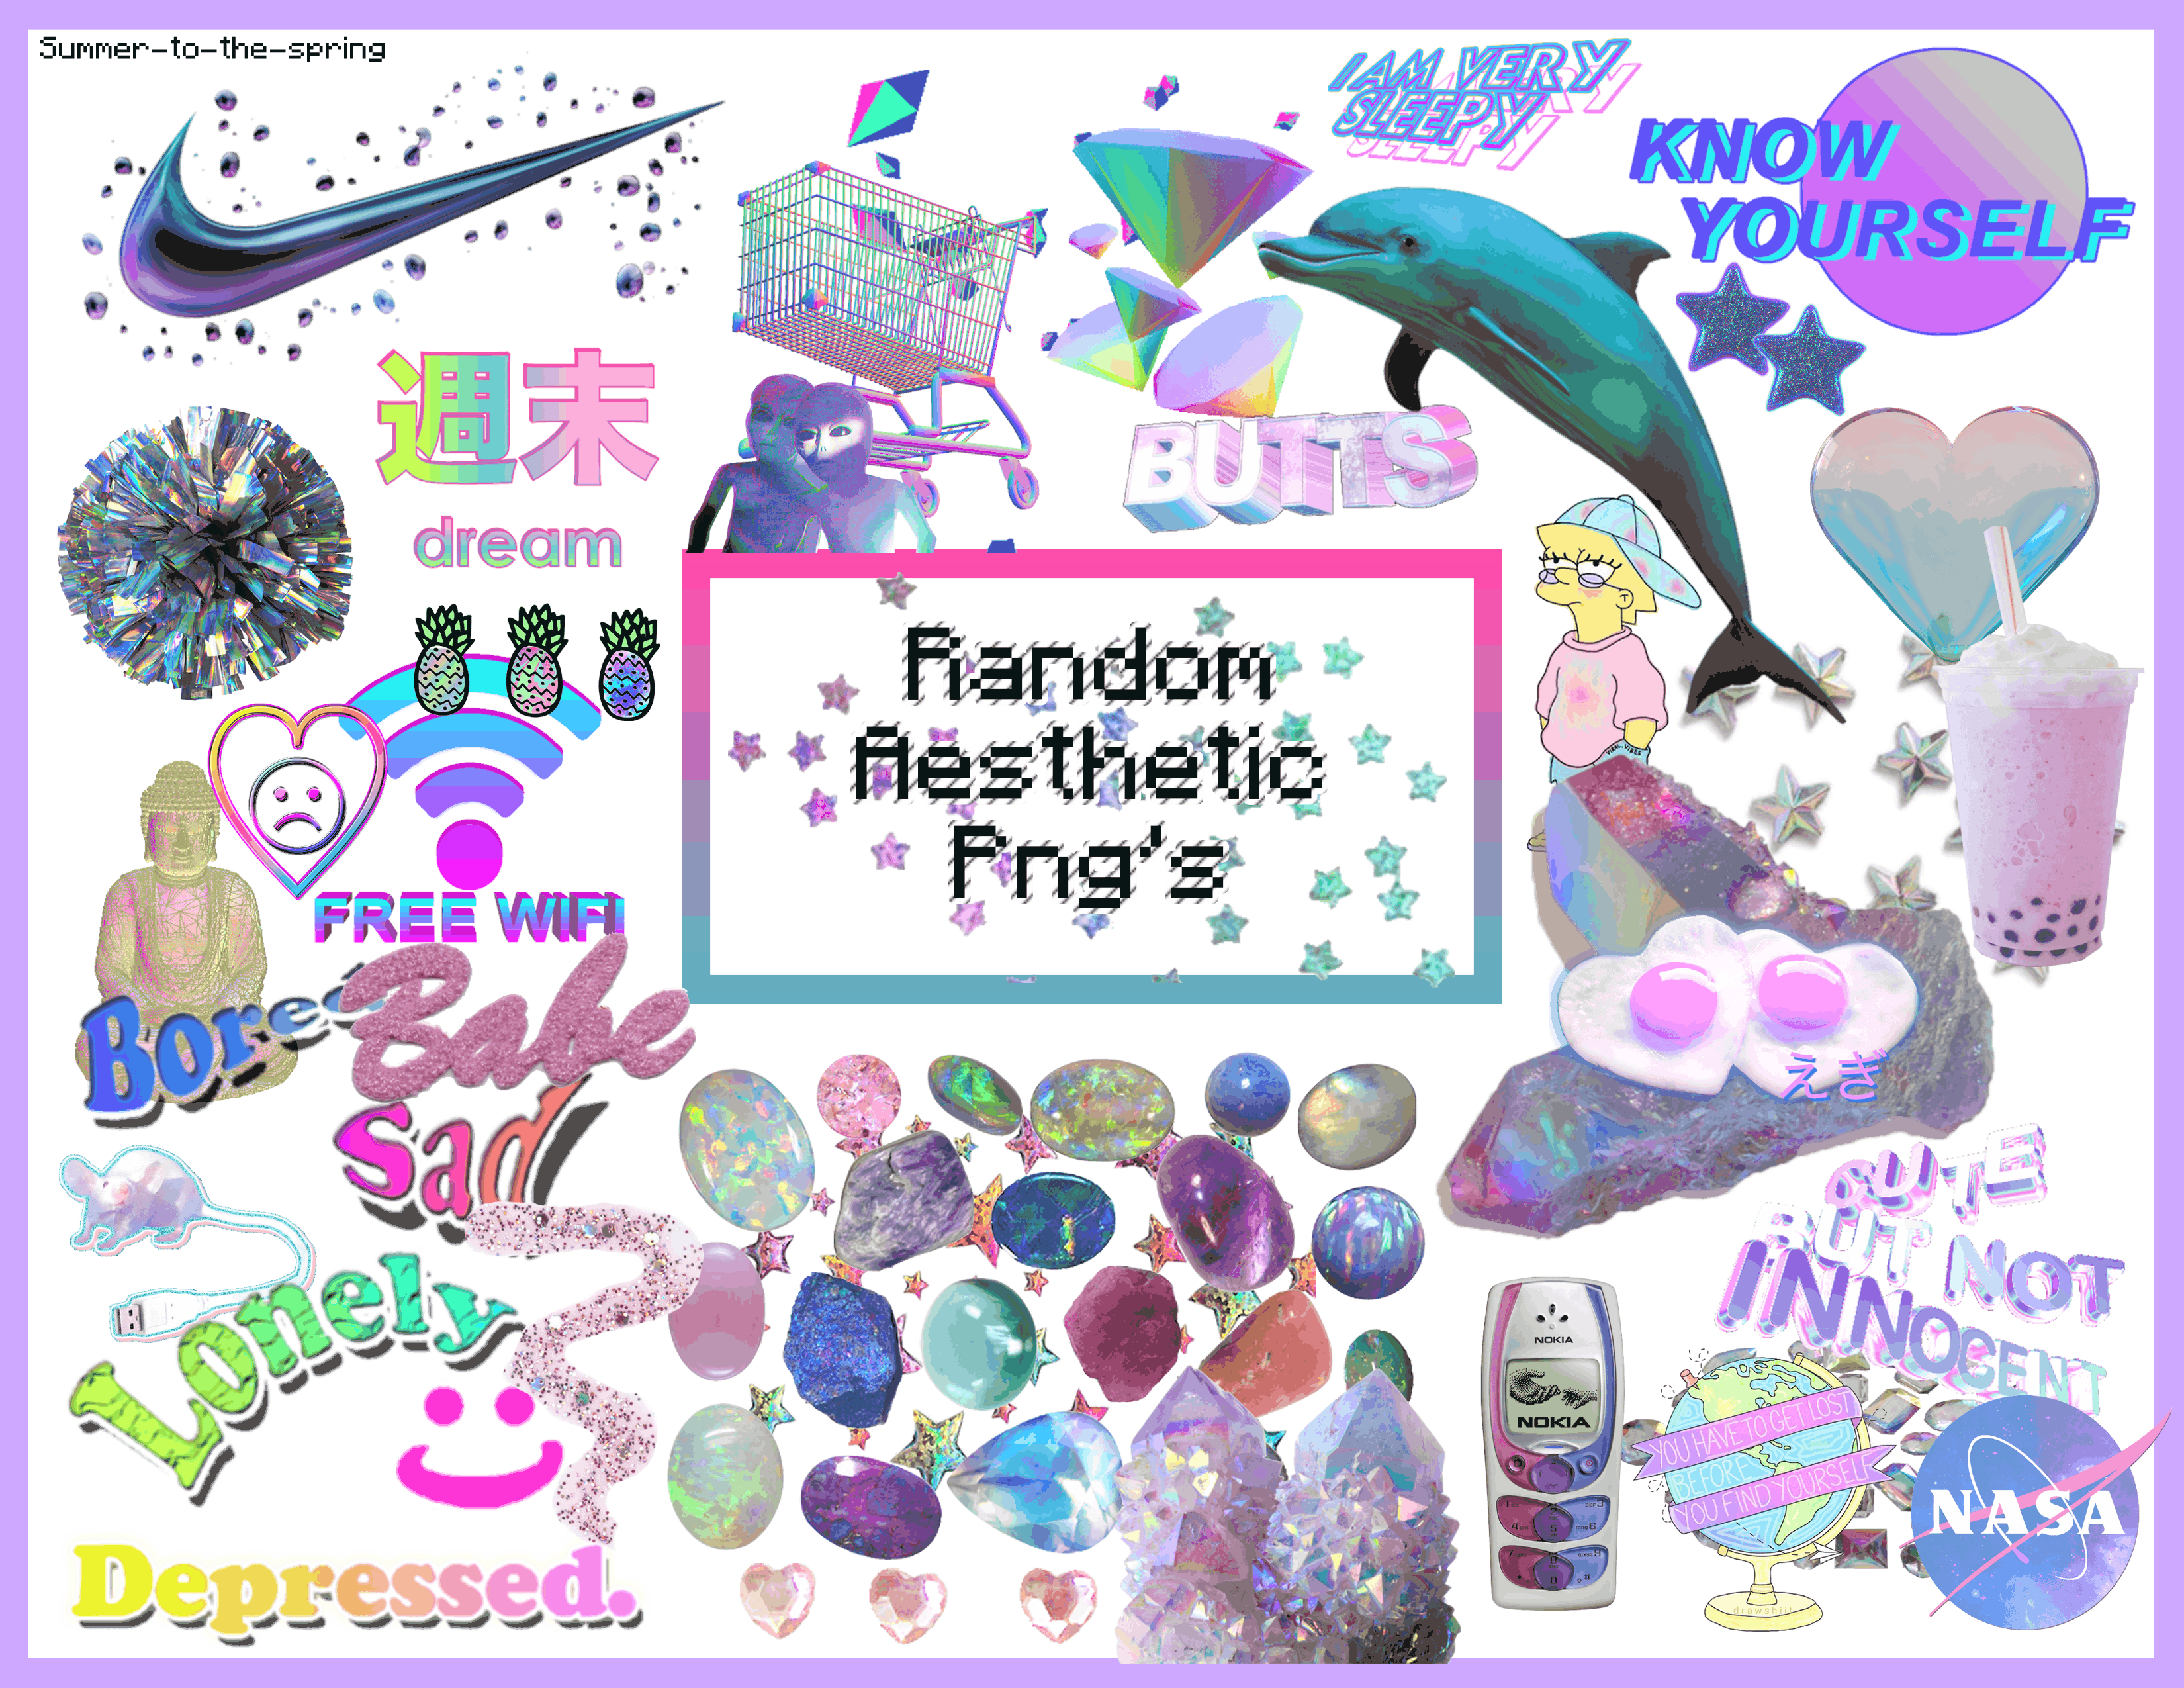 Random Aesthetic PNG's by Summer-to-the-spring